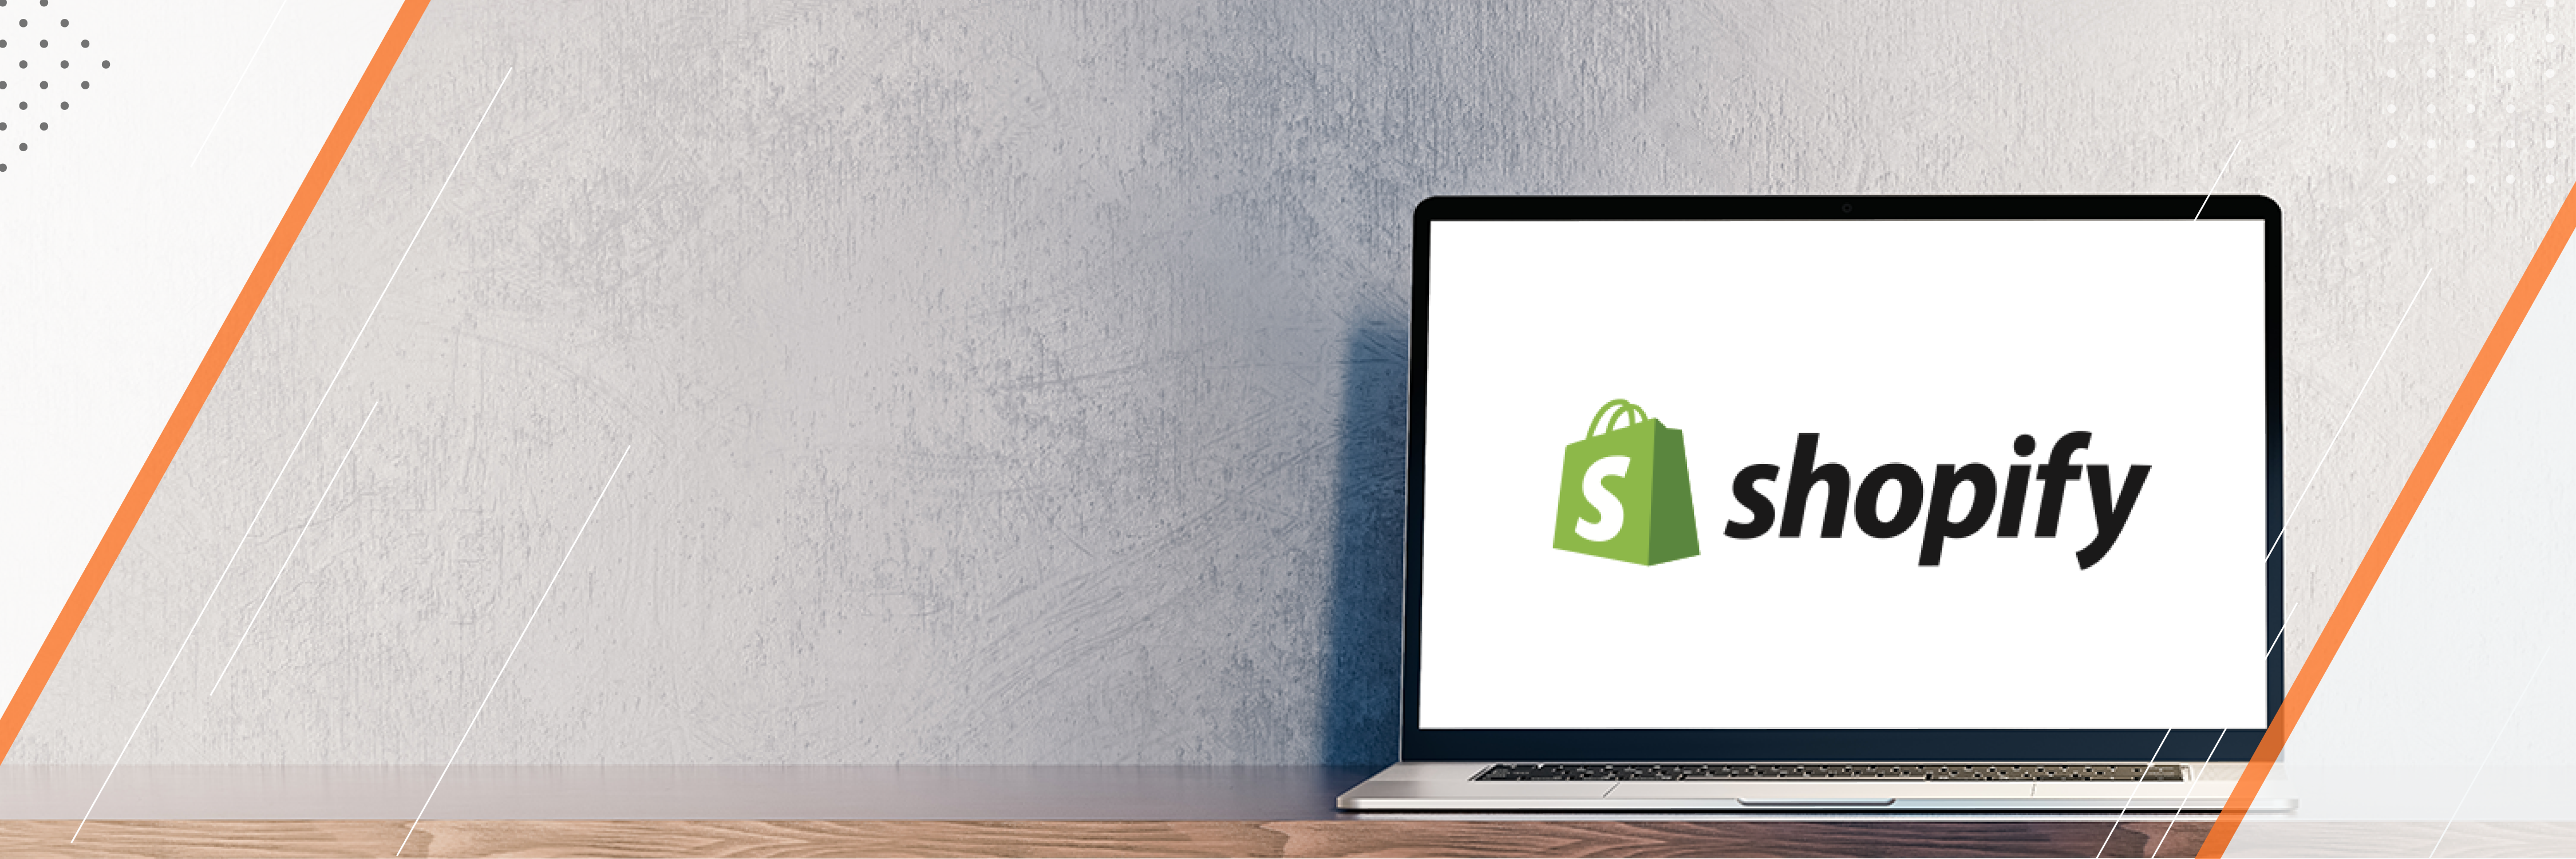 Shopify Accounting: Best Practices That Simplify the Process